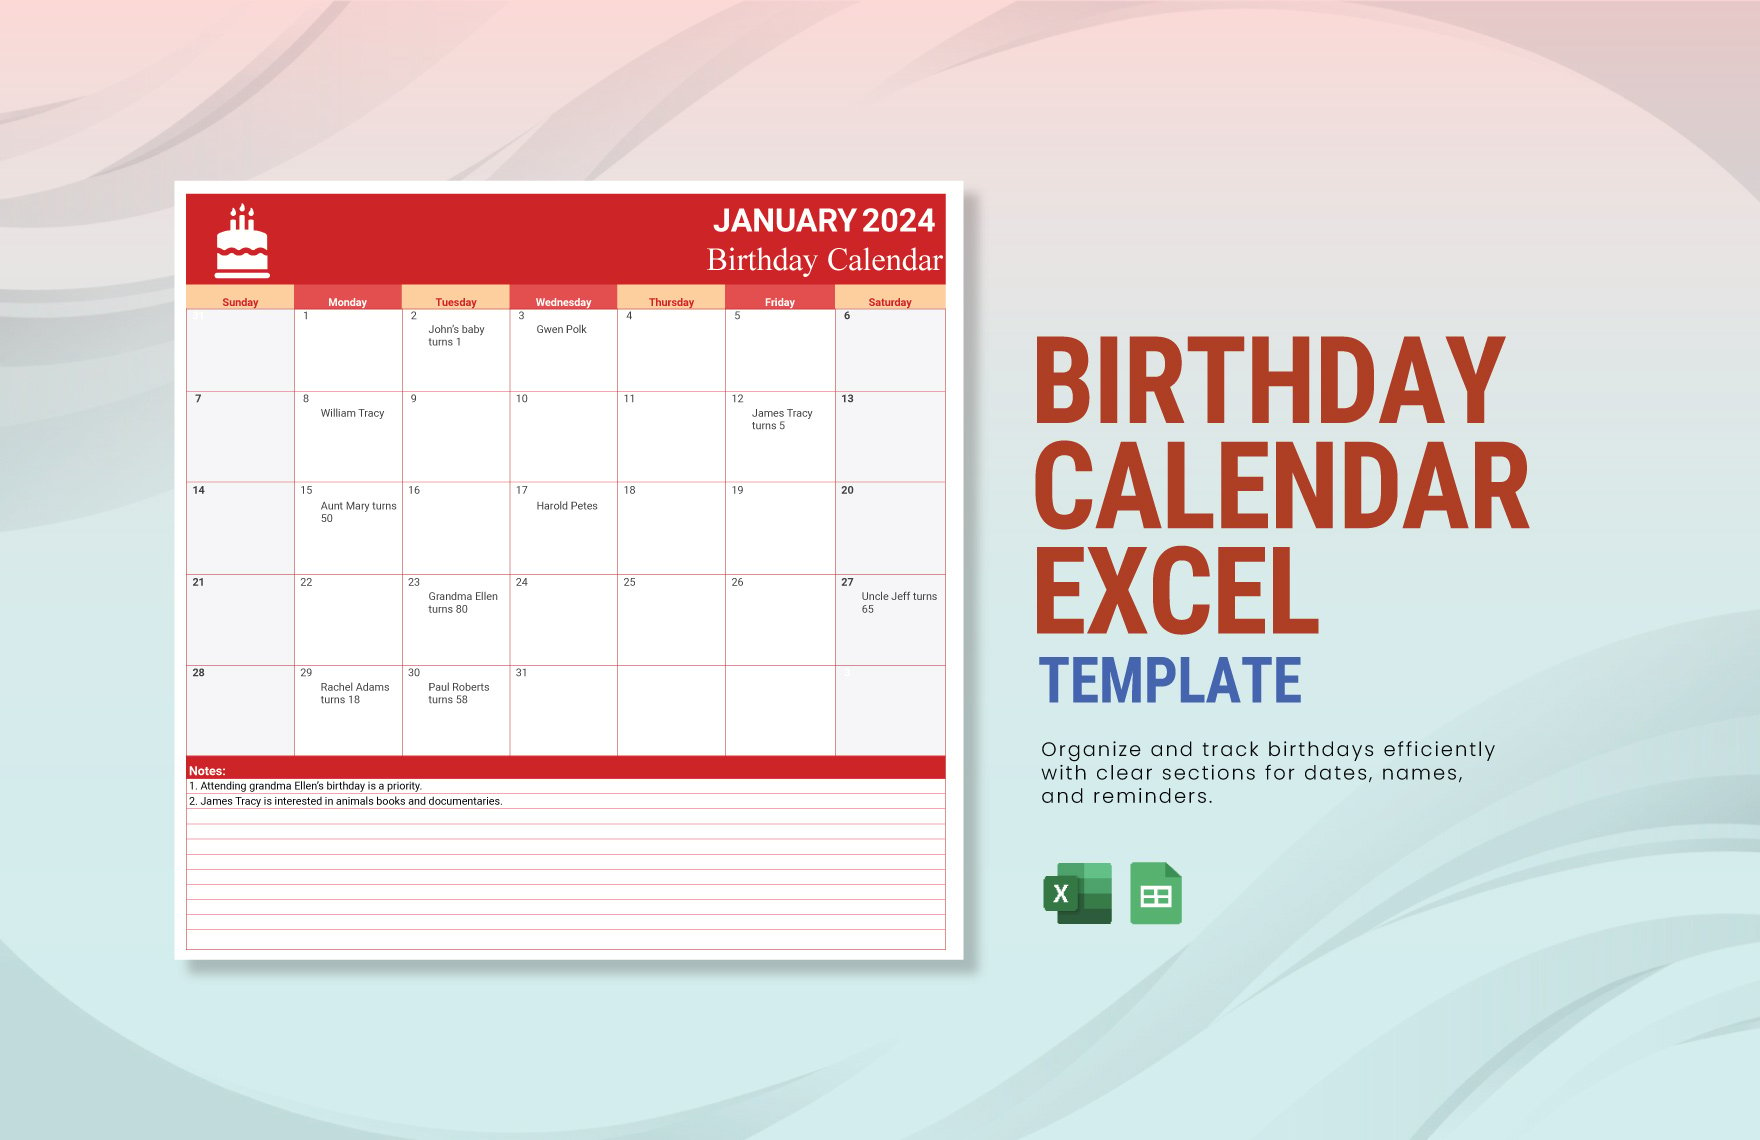 Birthday Calendar Excel Template in Excel, Google Sheets